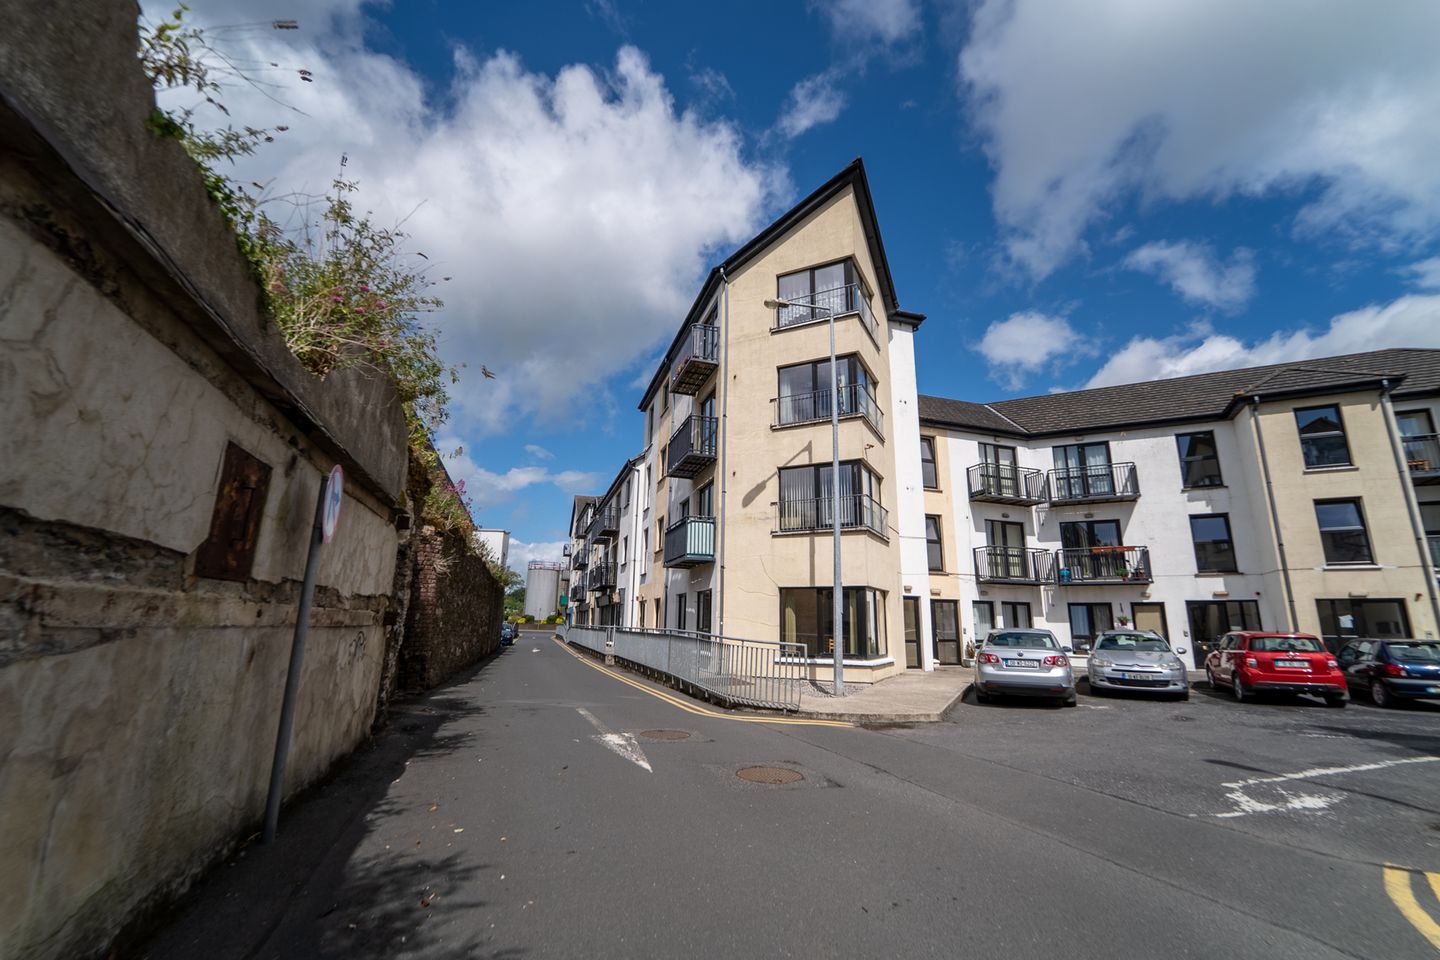 22 Apartments for Sale in One Lot, Priory Quay, Priory Lane, New Ross, Co. Wexford